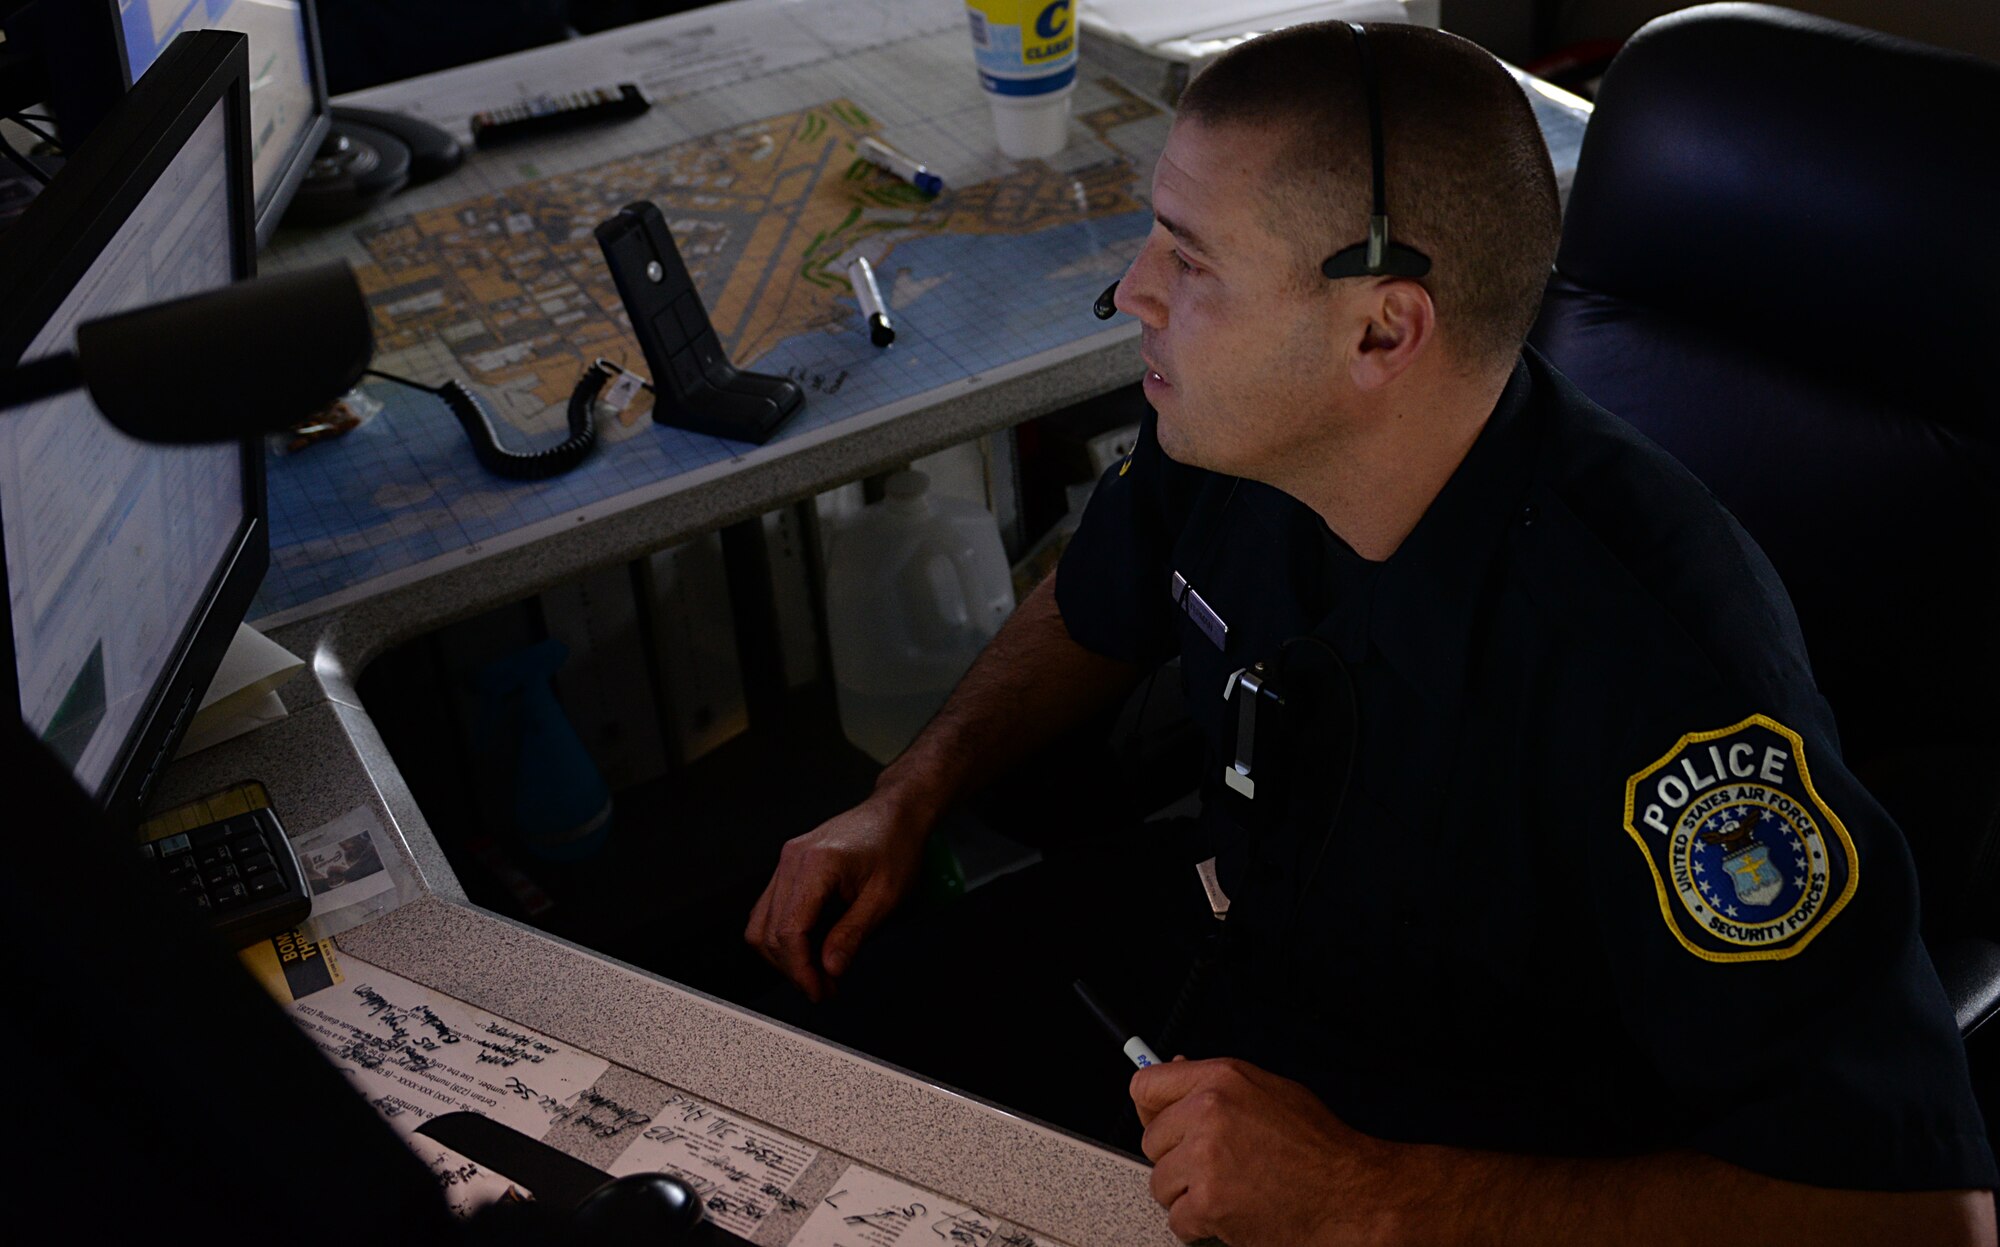 Officer Gary Peterman, 81st Security Forces alarm monitor, monitors base alarms March 12, 2015 at the base defense operations center, Keesler Air Force Base, Miss. The 81st SFS Airmen and their civilian counterparts work together by performing multiple roles to keep members of Keesler safe, ranging from checking identifications at base entrances to searching for explosives and narcotics with military working dogs. (U.S. Air Force photo by Senior Airman Holly Mansfield)